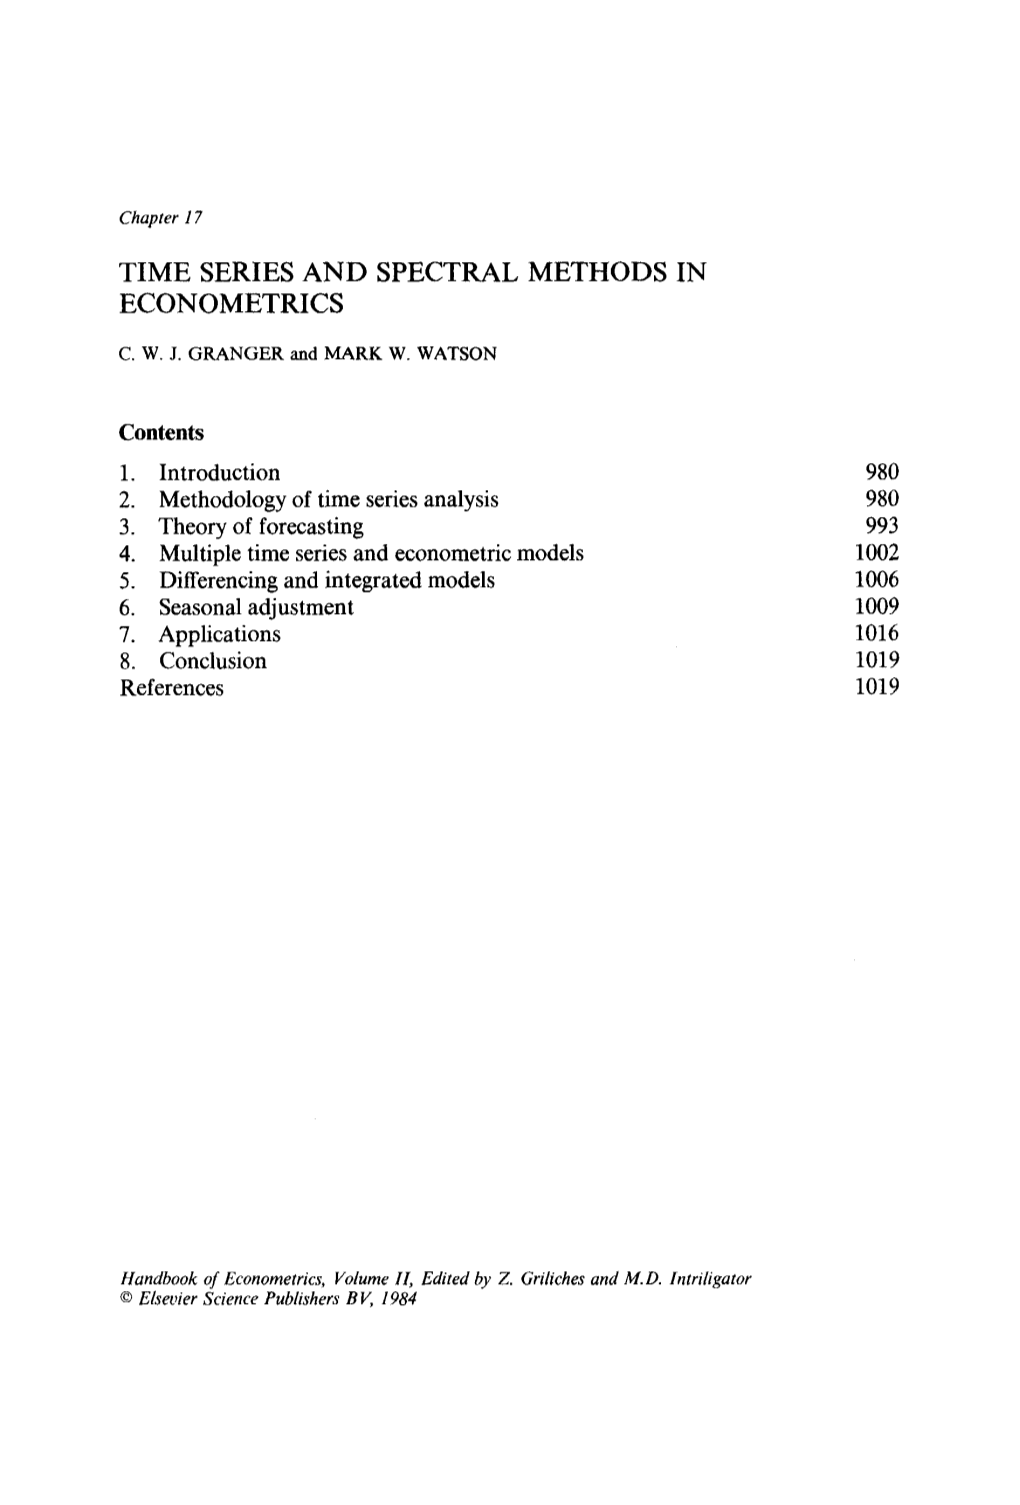 Time Series and Spectral Methods in Econometrics